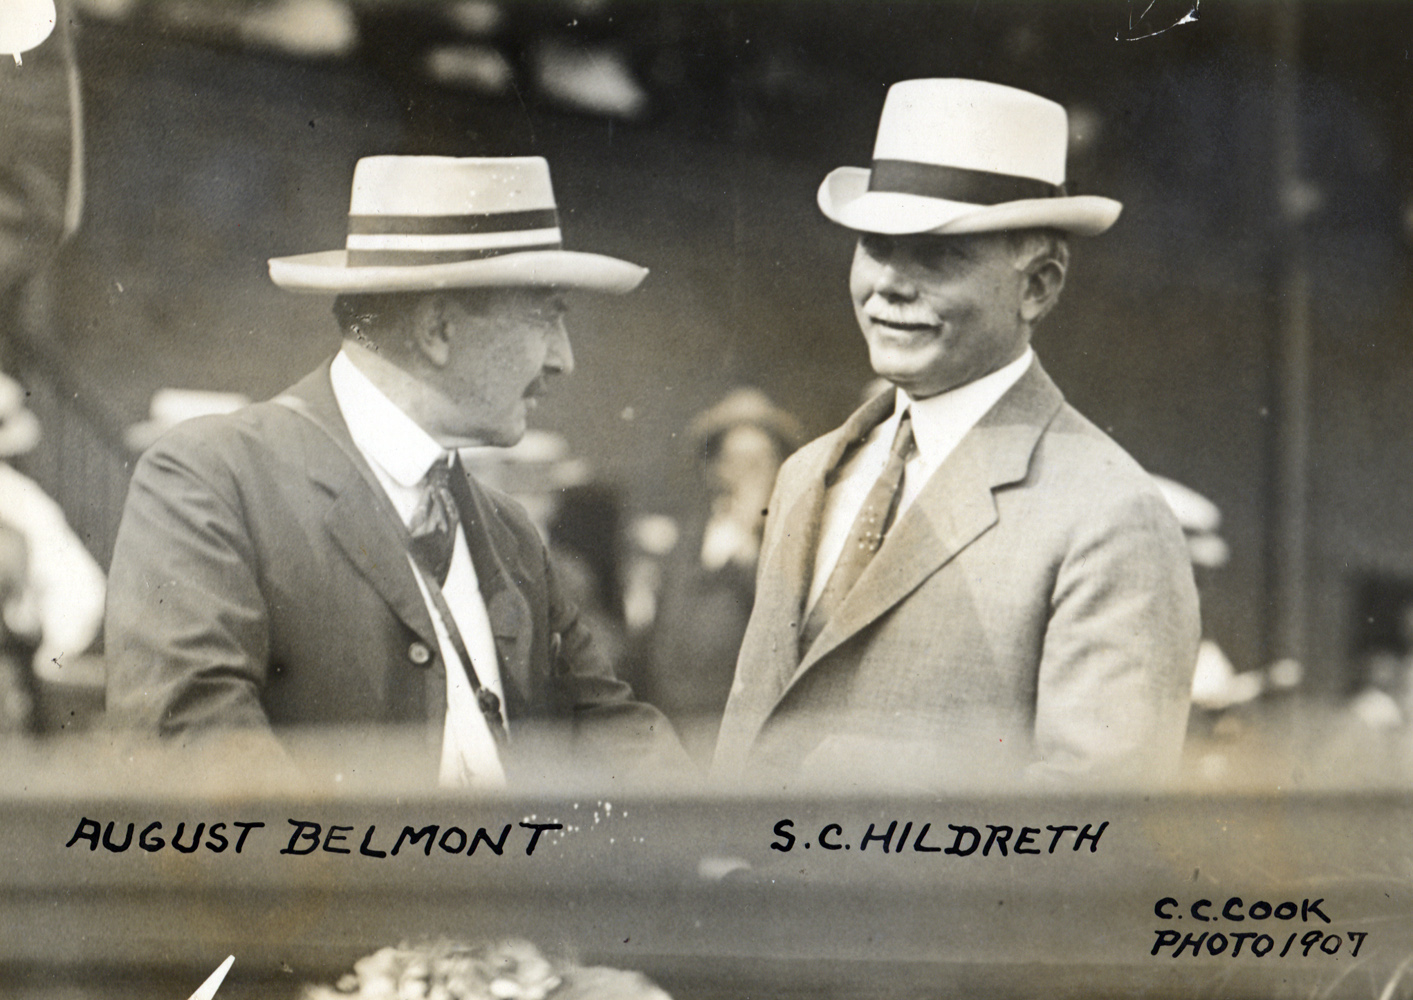 August Belmont II and Sam Hildreth at the races in 1907 (C. C. Cook/Museum Collection)